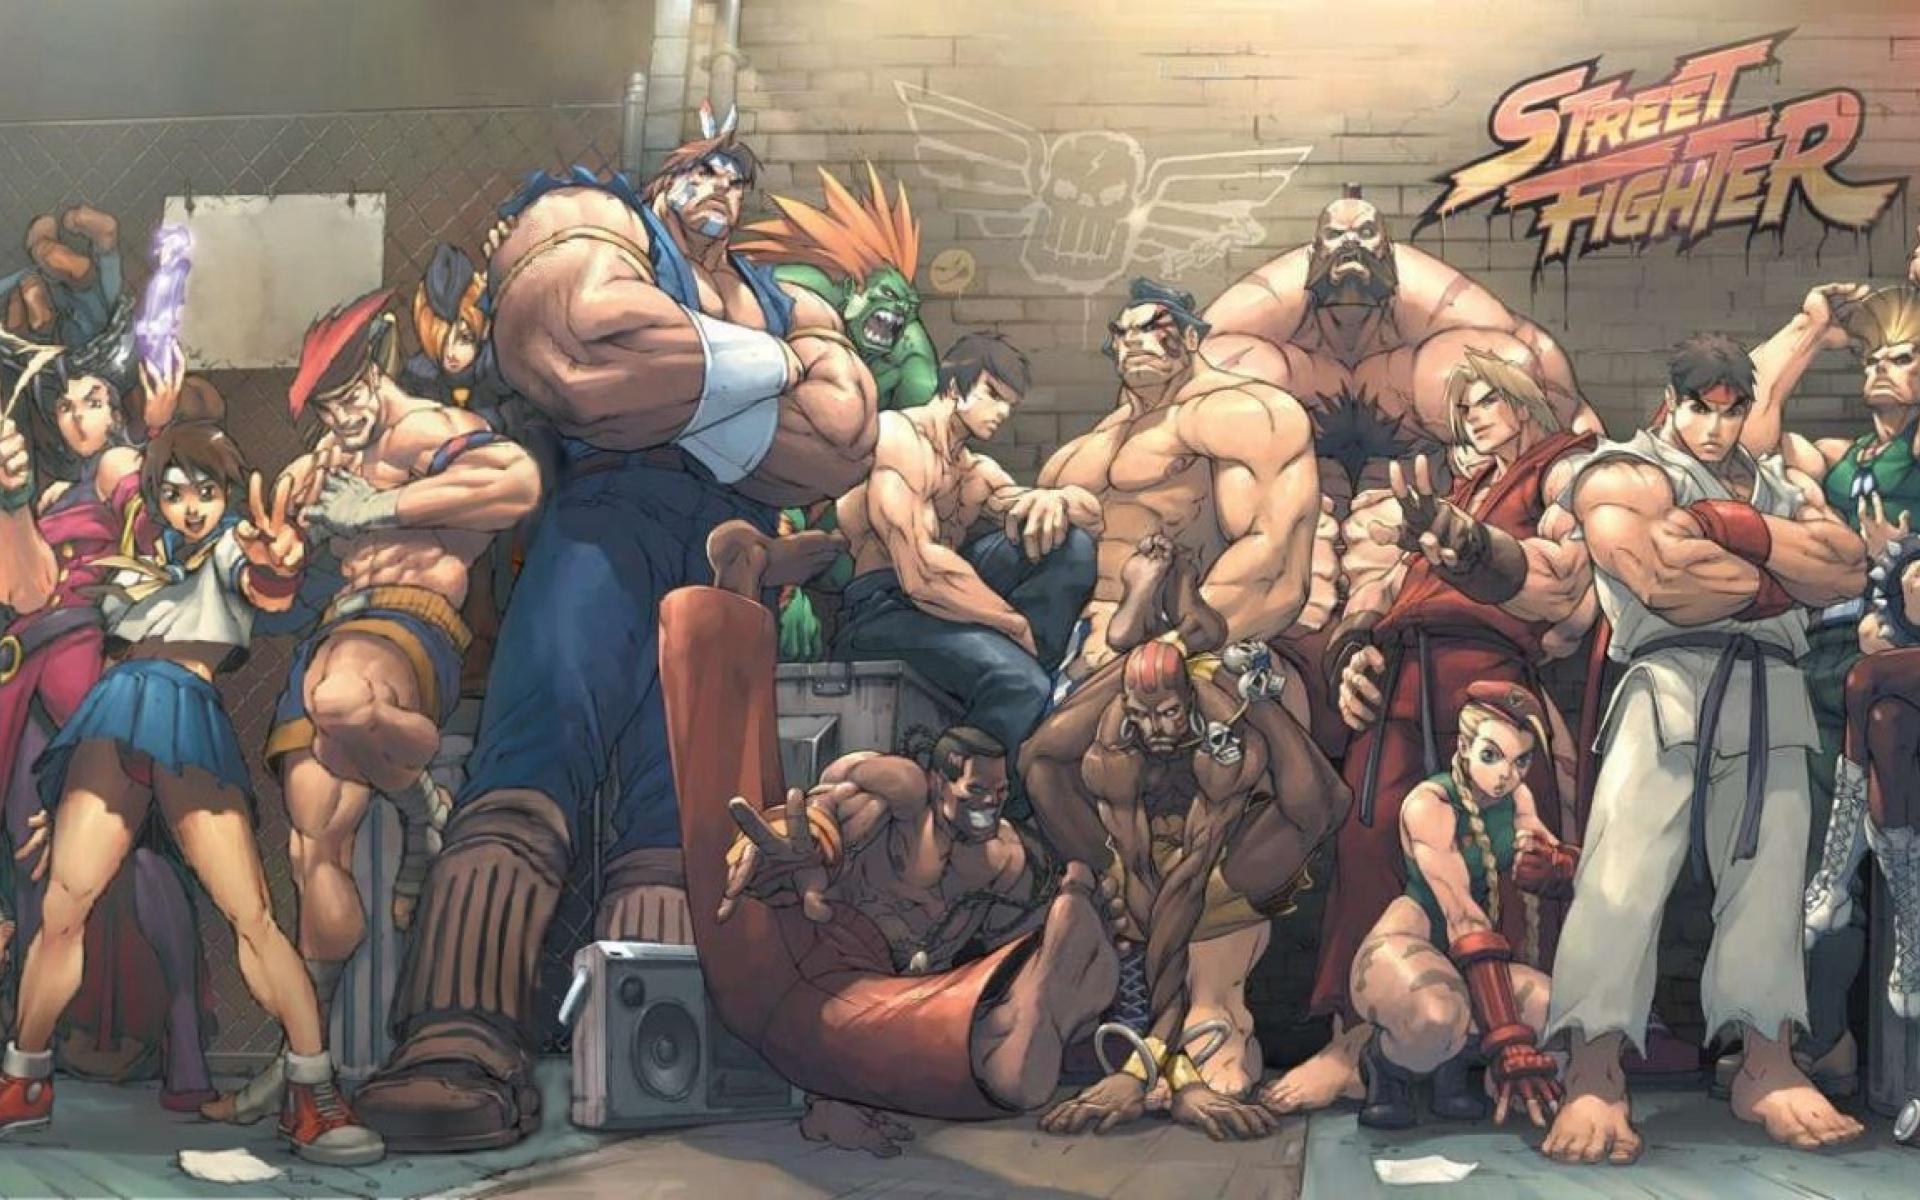 Street Fighter Coming to the PS4 & Xbox One? - Max Level